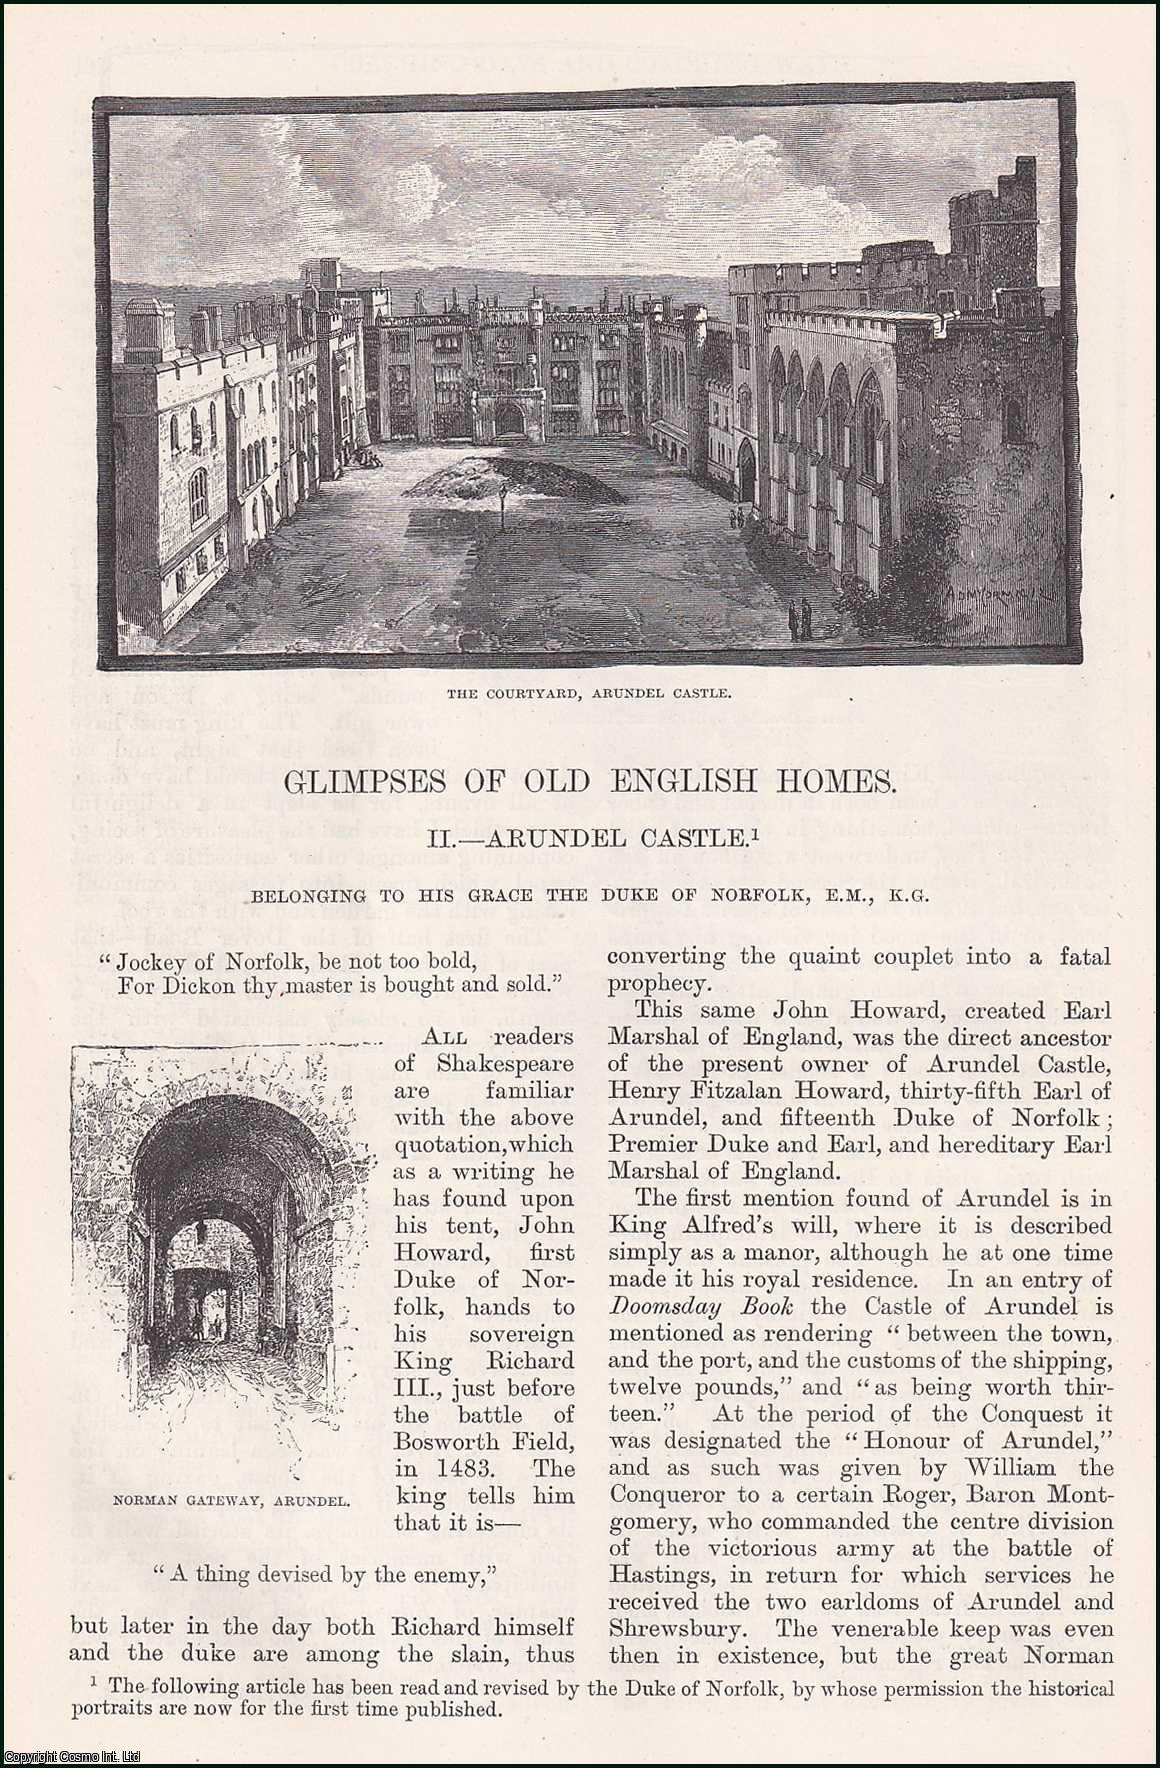 Elizabeth Balch - Arundel Castle; Glimpses of Old English Homes. An original article from the English Illustrated Magazine, 1888.